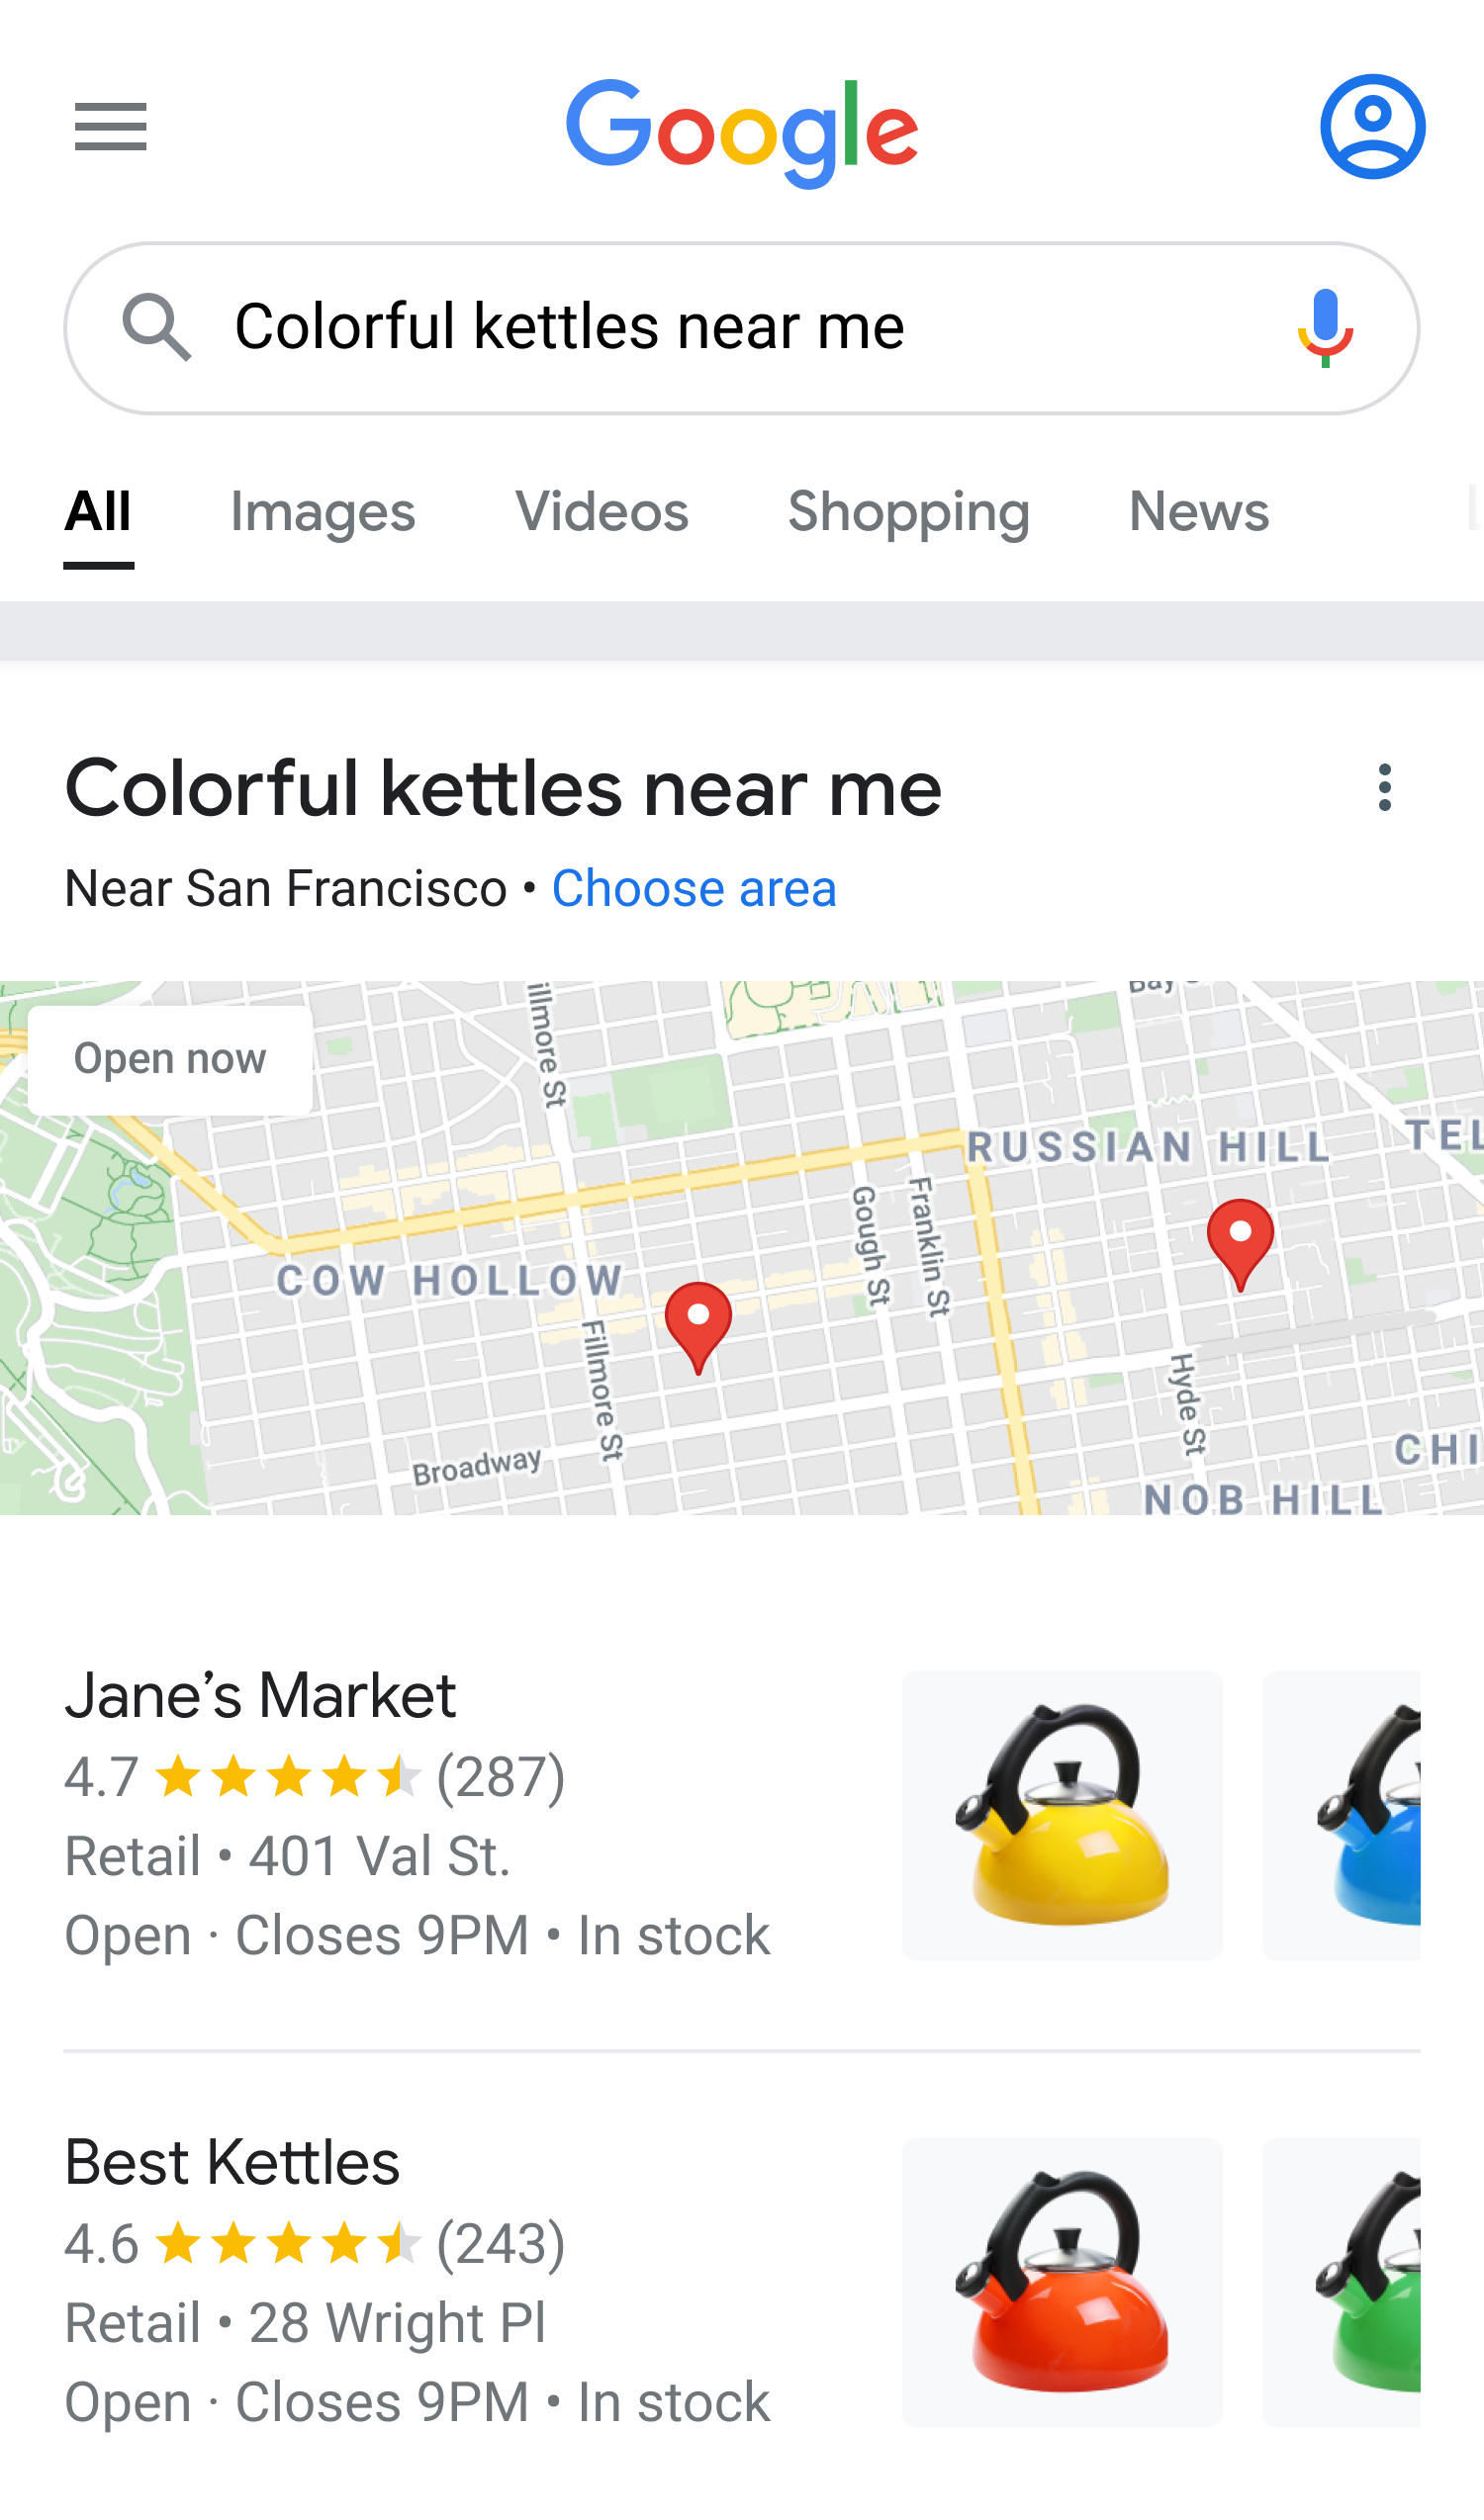 Google Search results for "Colorful kettles near me."